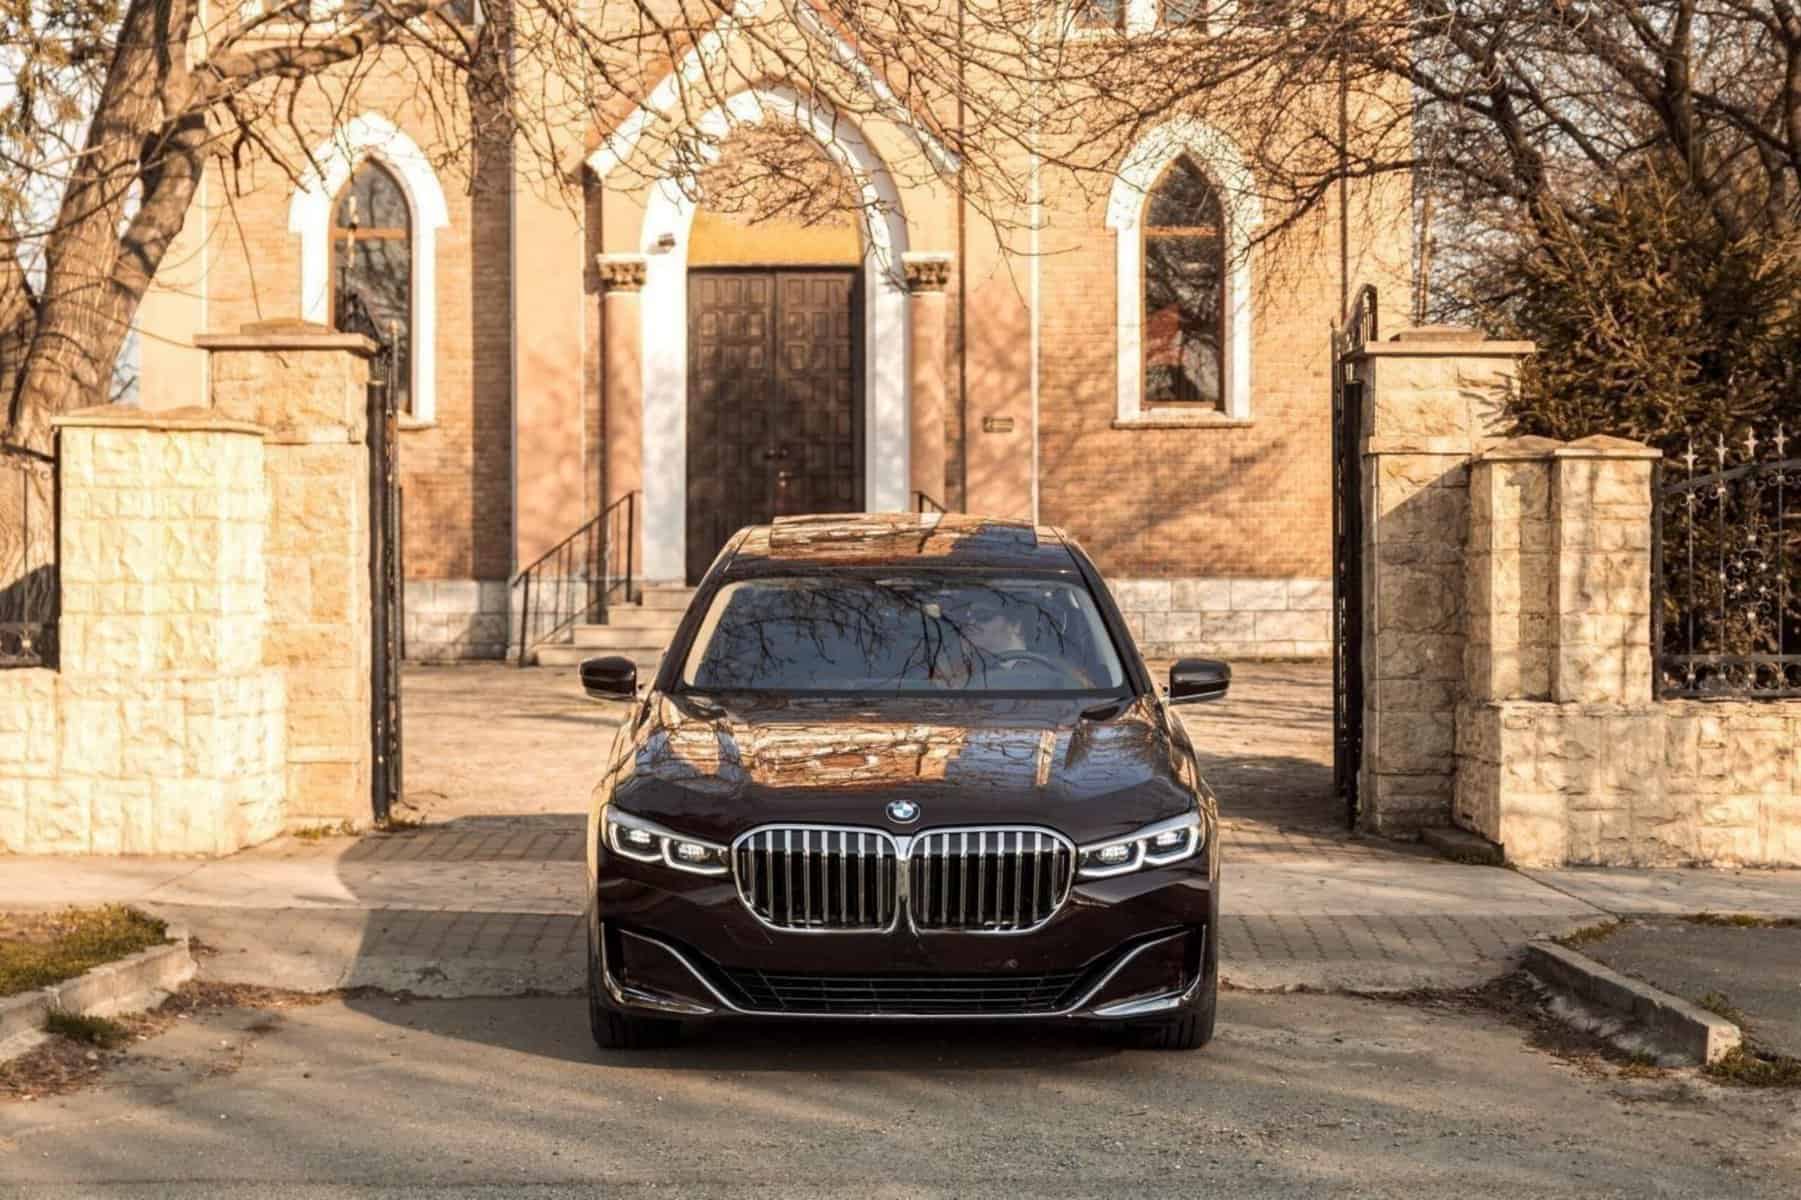 The massive front grille of the Bmw 7-series representative car taxi